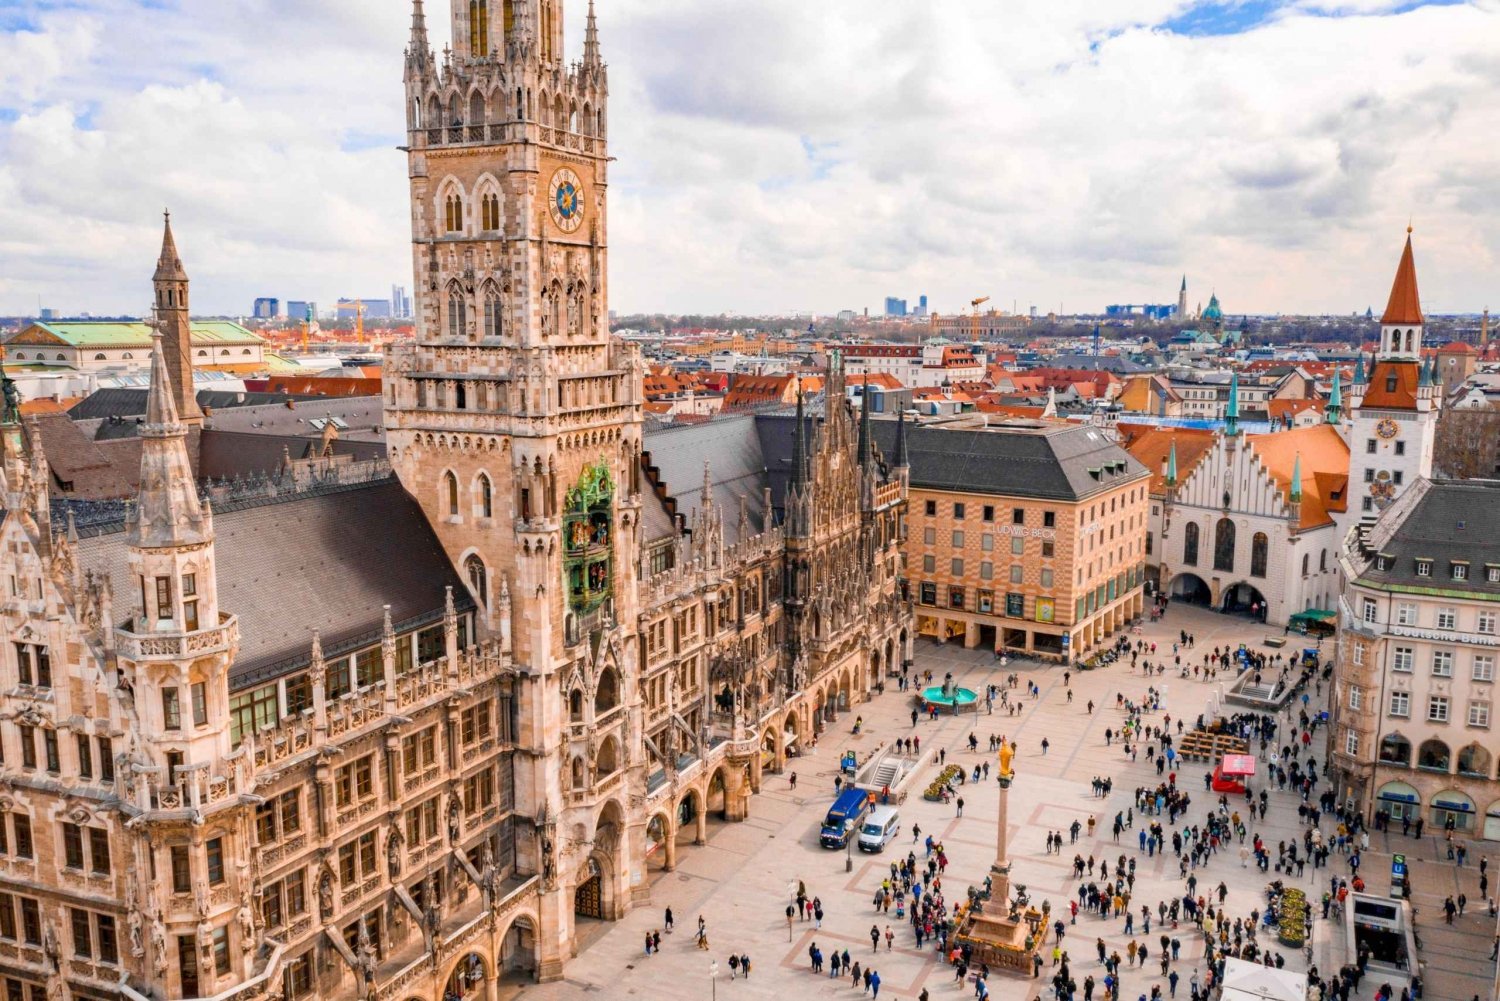 Transfer from Vienna to Munich with 2 hours of sightseeing